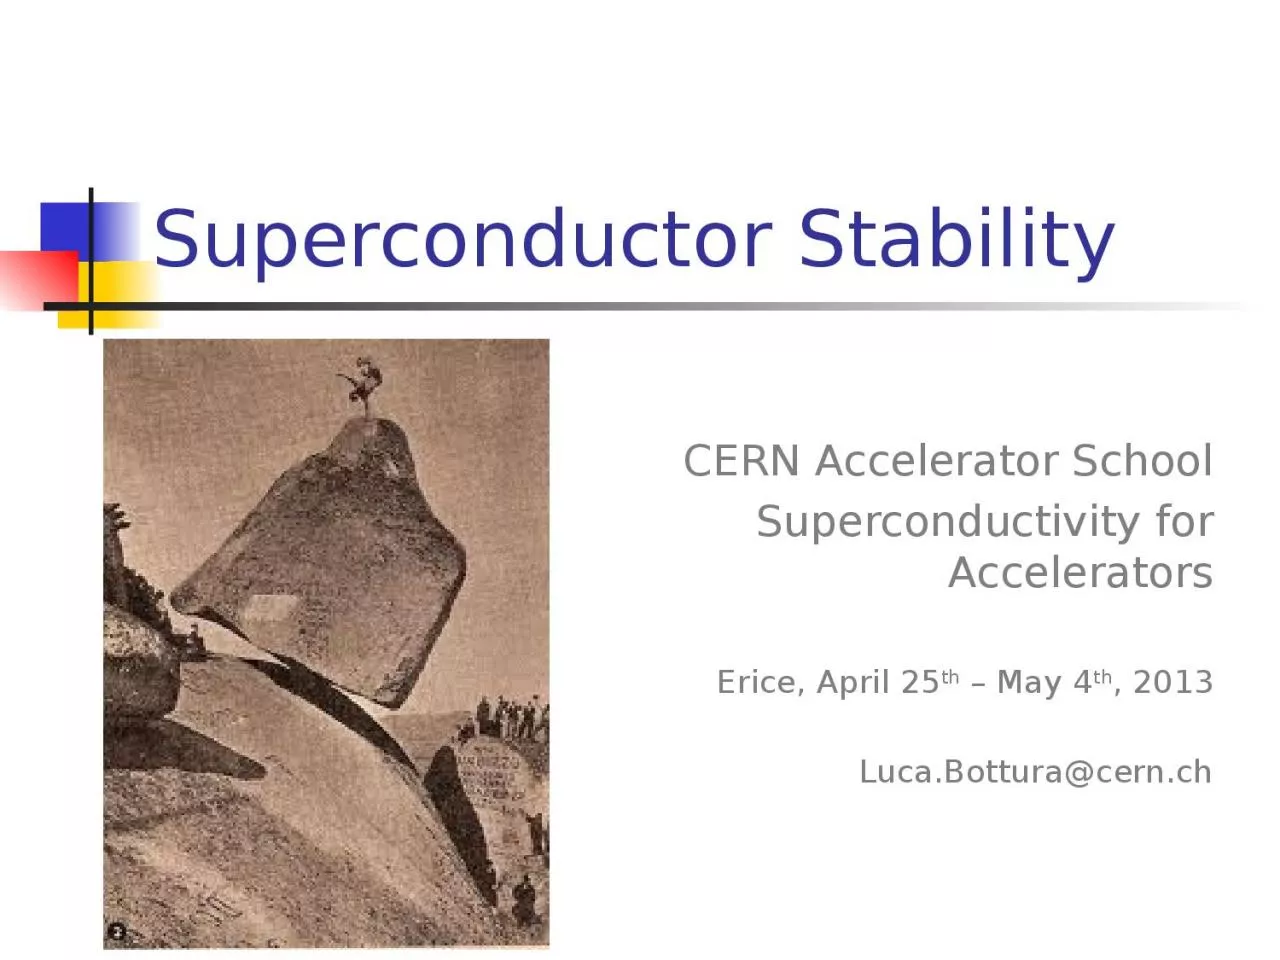 Superconductor Stability